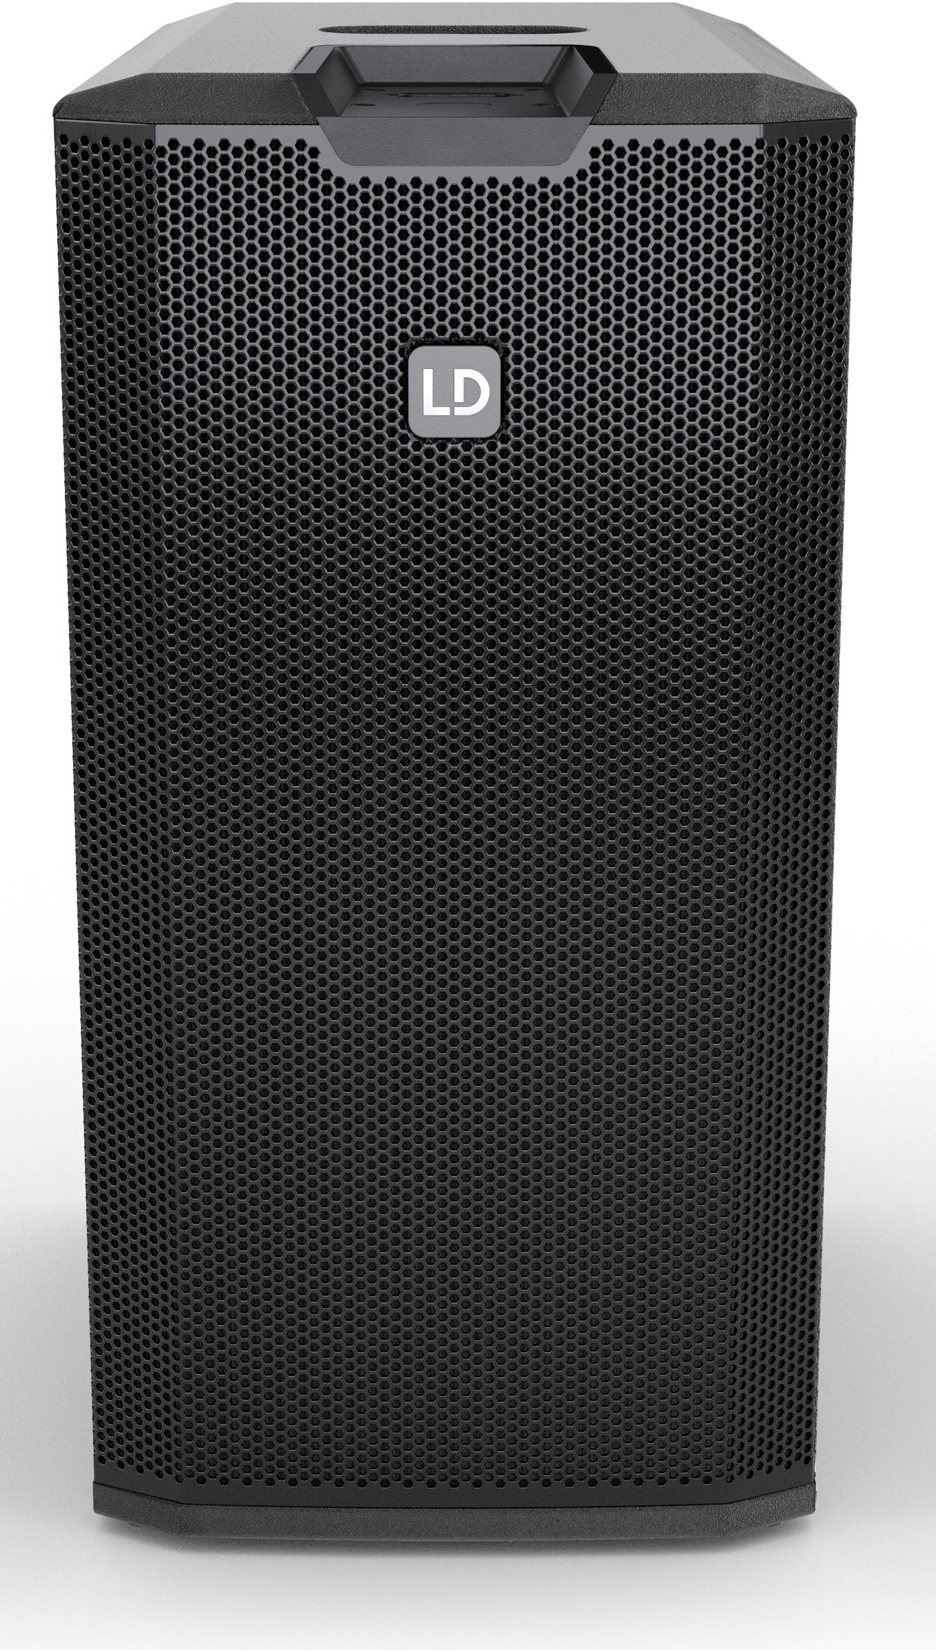 Ld Systems Maui 11 G3 Sub - Systemes Colonnes - Variation 1